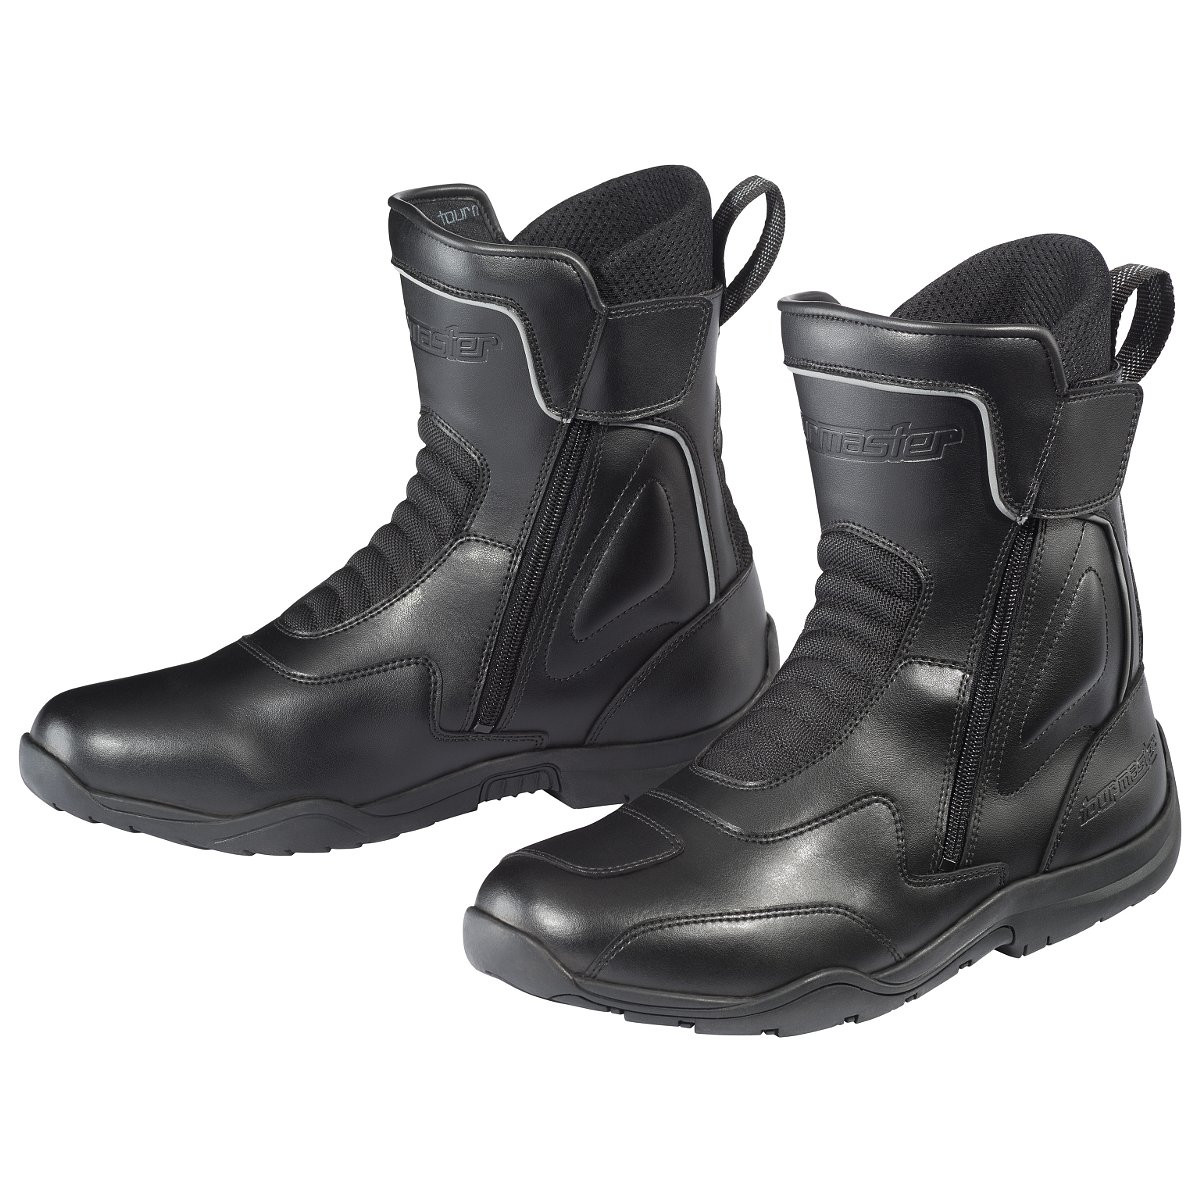 Tour Master Flex WP Boots - Motorcycle 